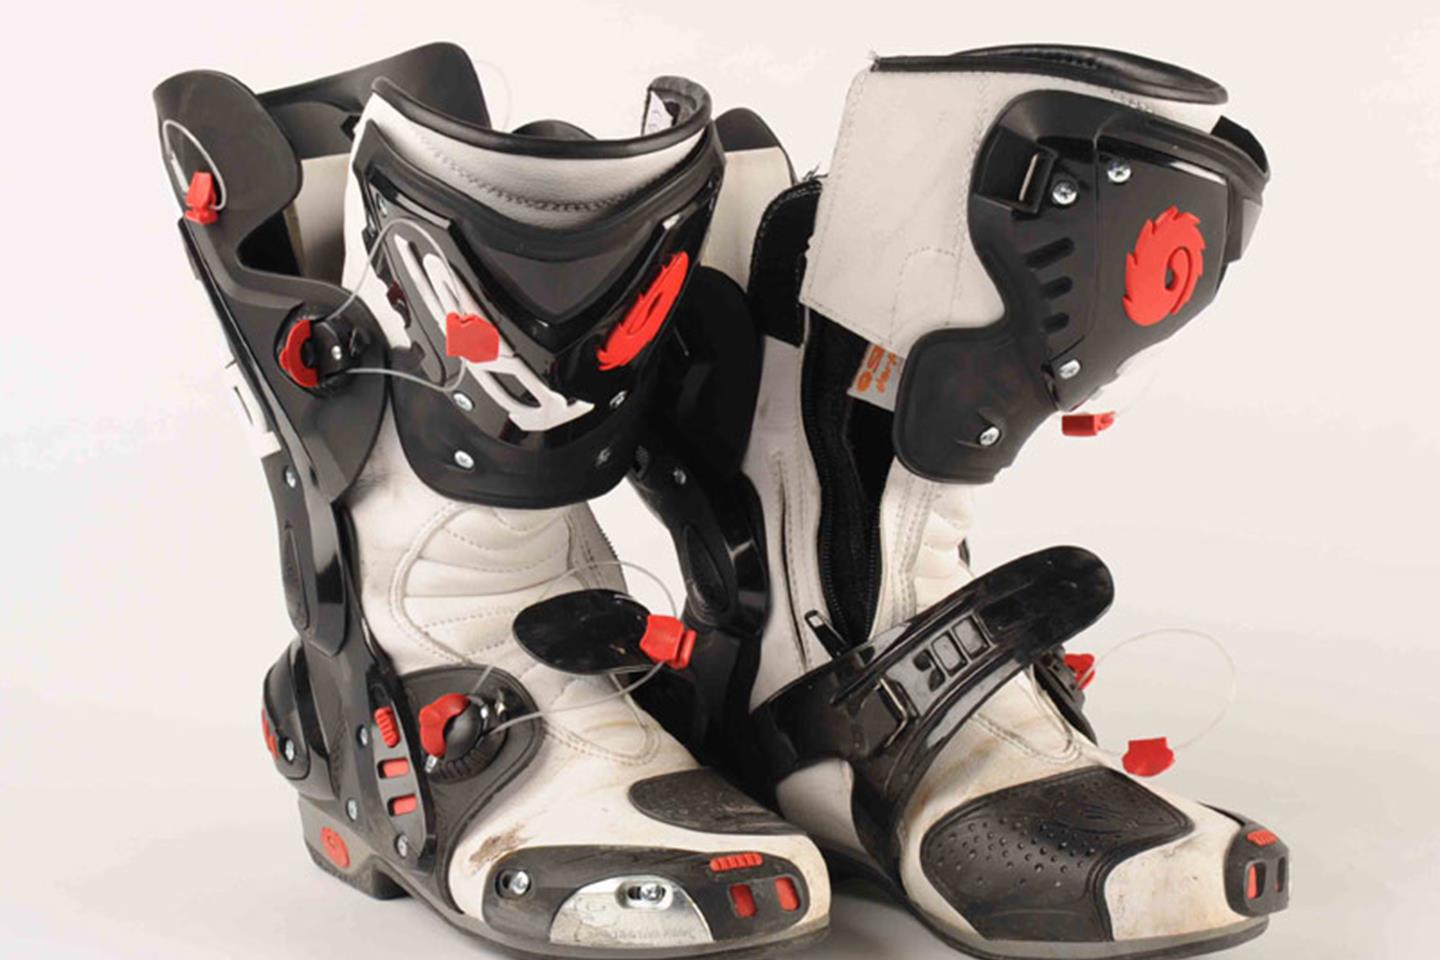 sidi vortice motorcycle boots